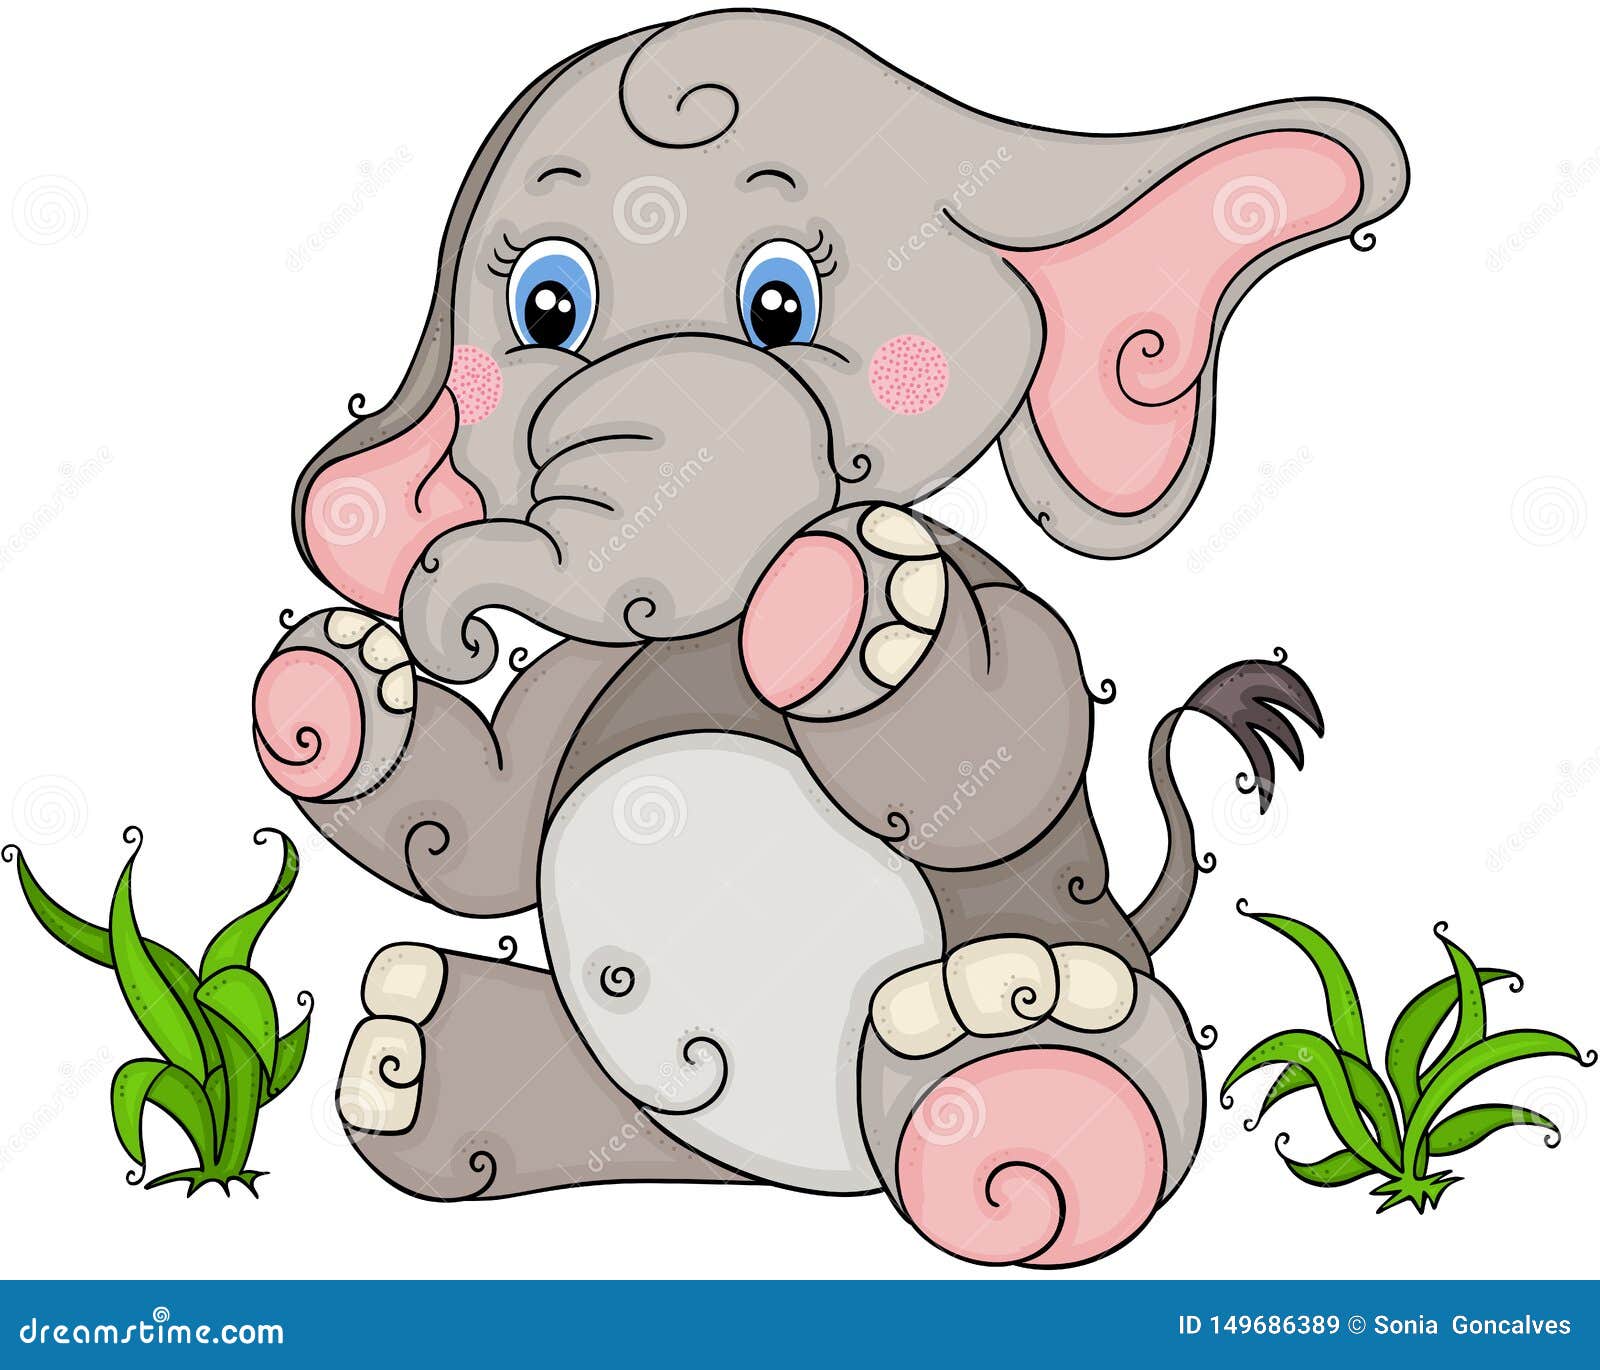 724+ Sitting Baby Elephant Svg Free - SVG,PNG,EPS & DXF File Include